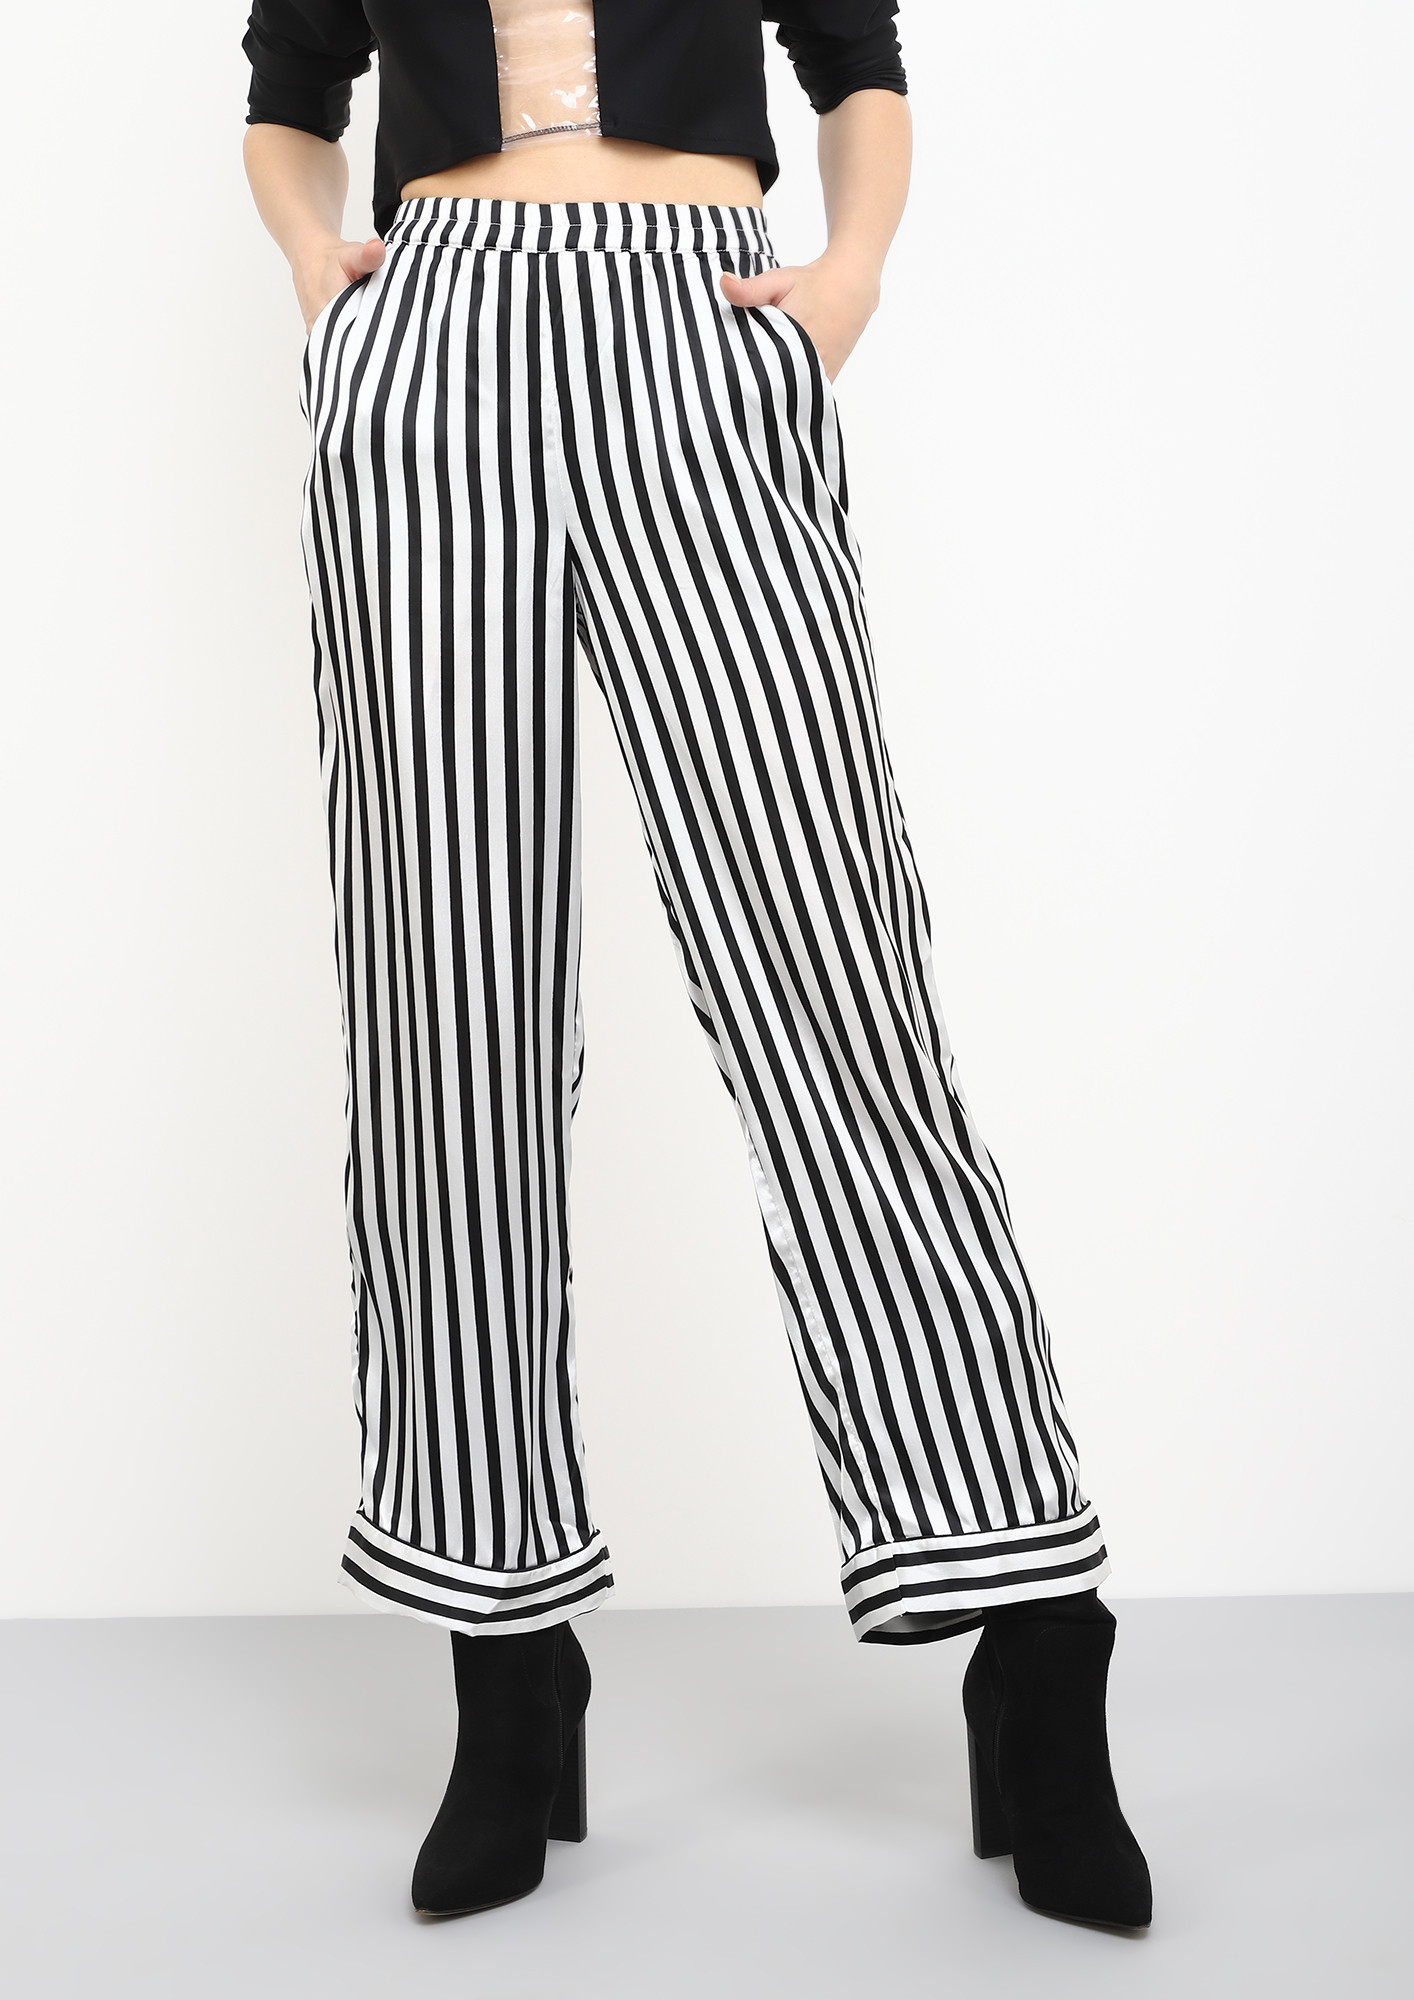 PRETTY STRAIGHT AND FORWARD BLACK STRIPED TROUSERS